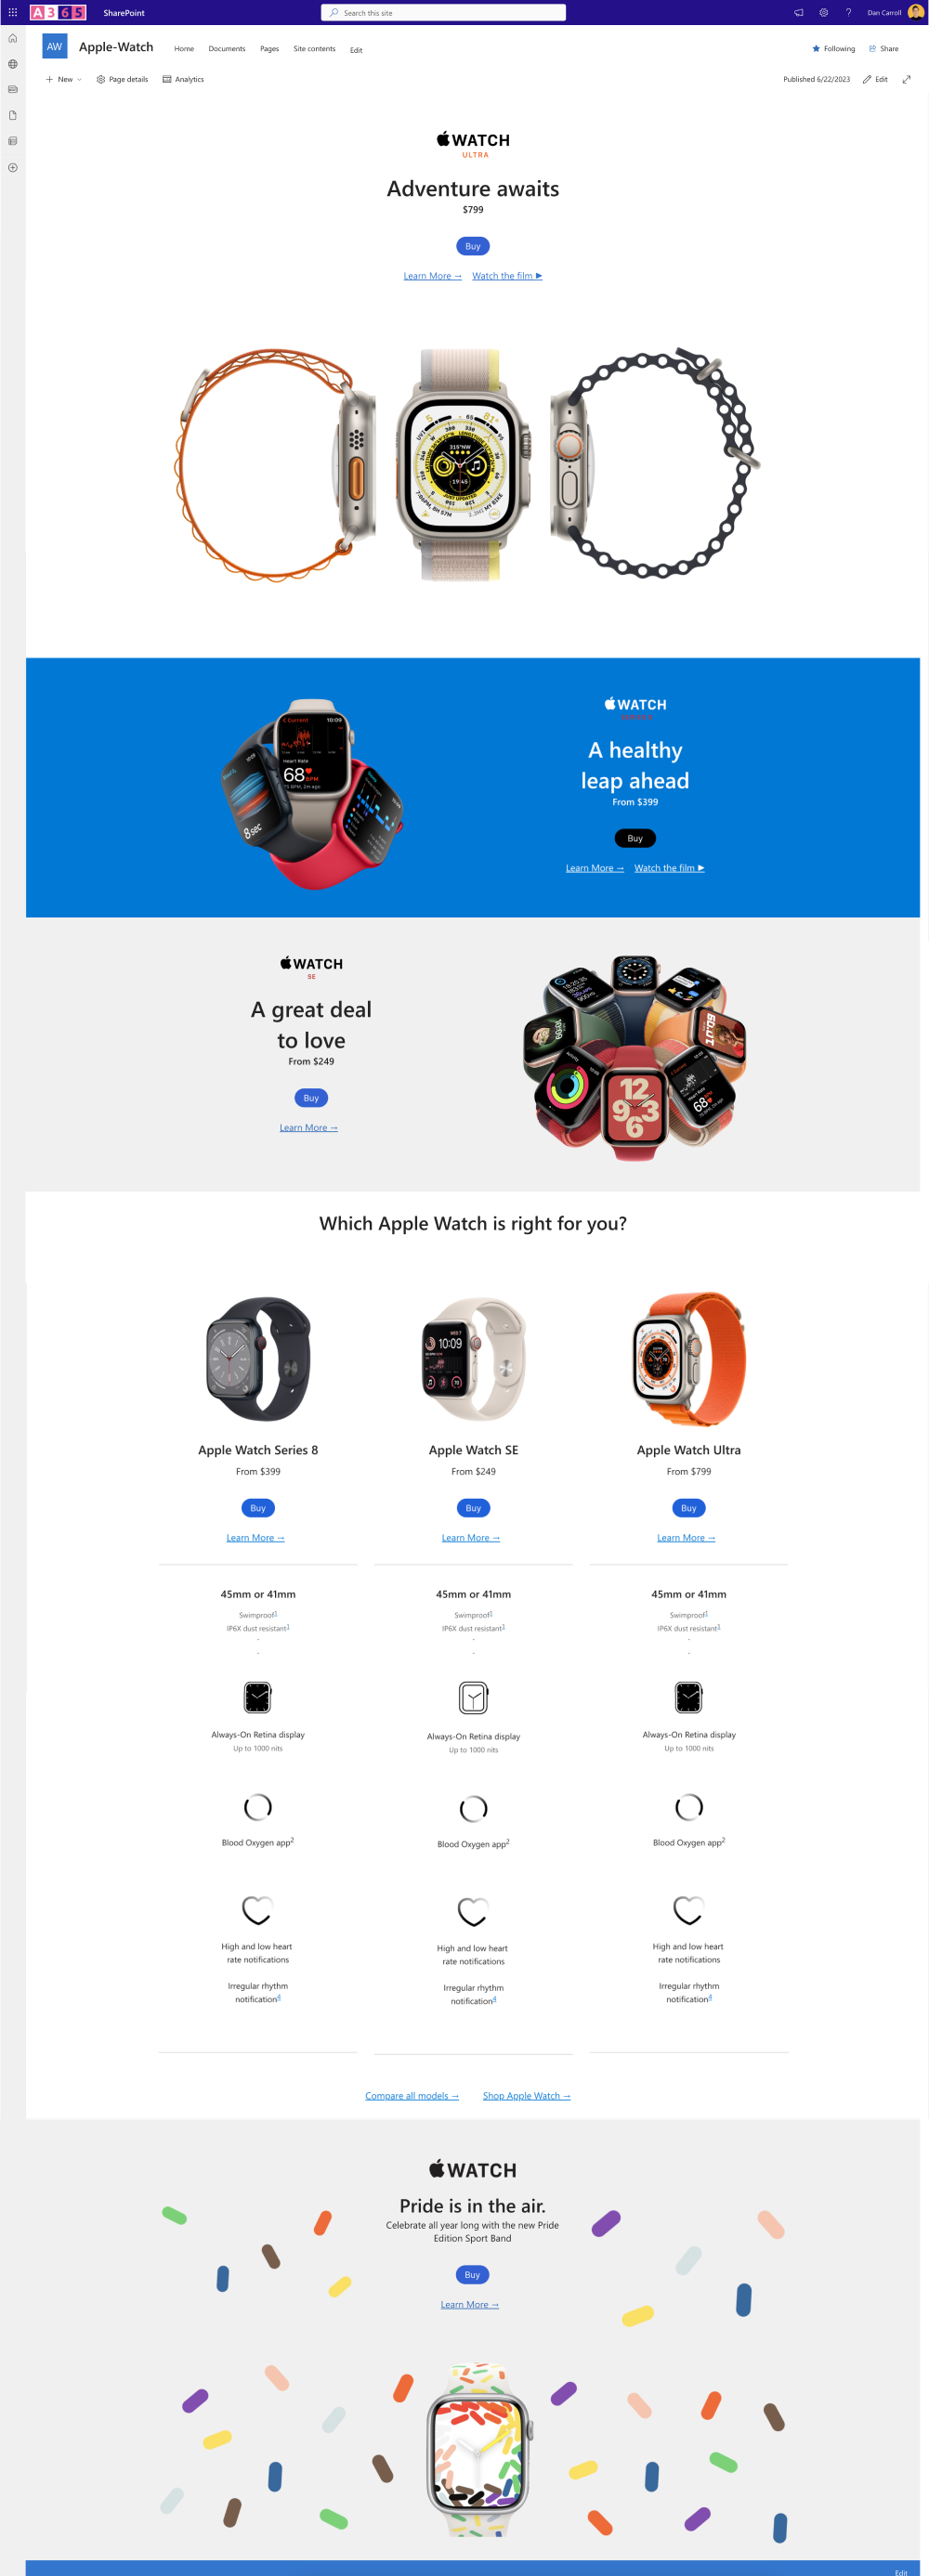 SharePoint vesrsion of the Apple Watch Landing Page